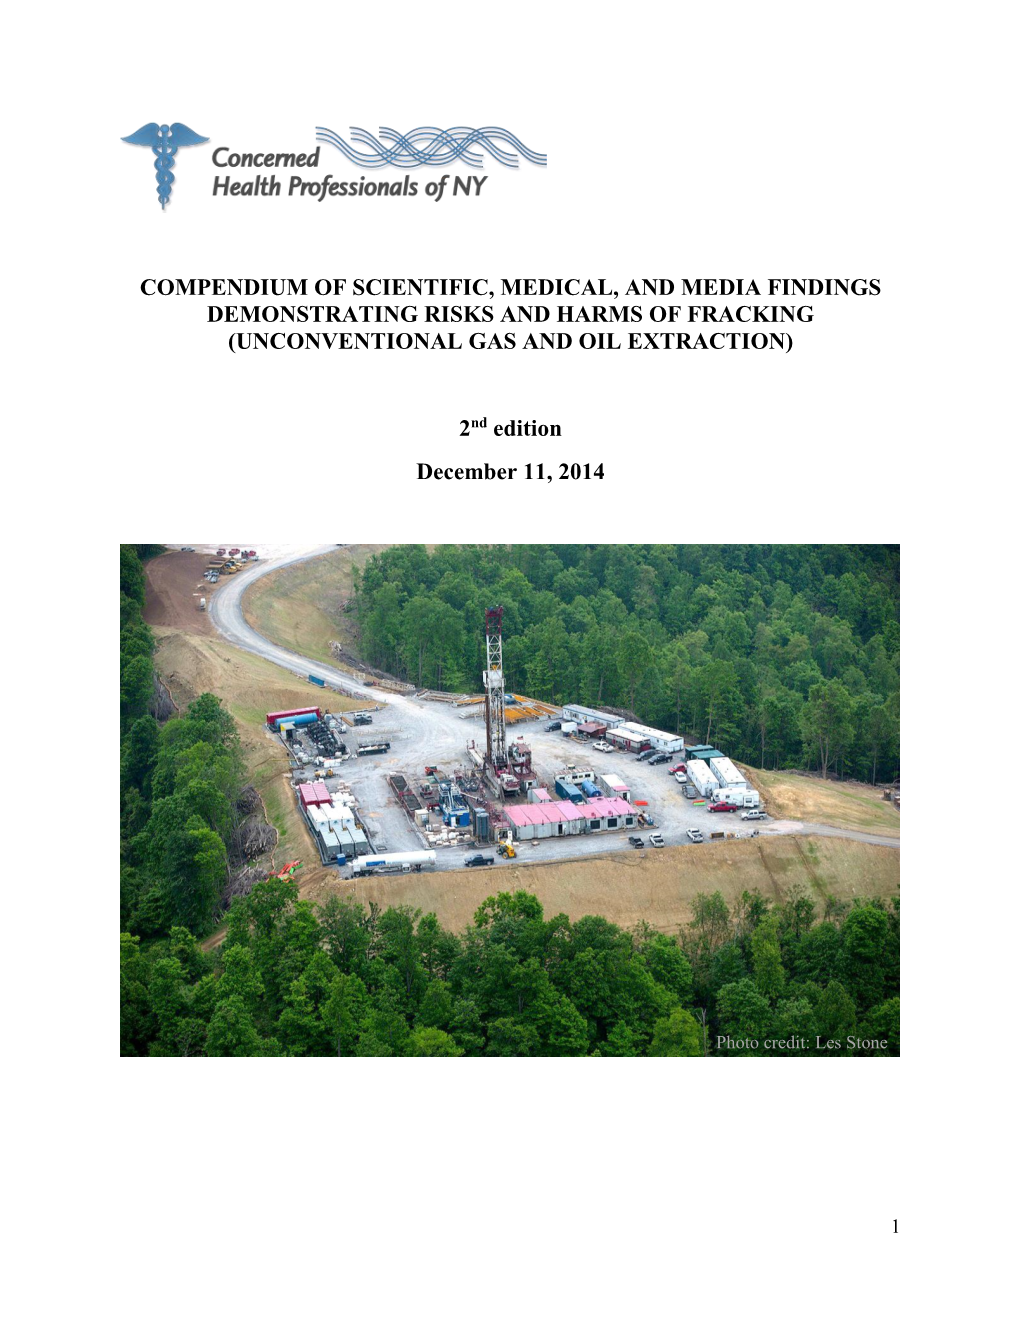 Compendium of Scientific, Medical, and Media Findings Demonstrating Risks and Harms of Fracking (Unconventional Gas and Oil Extraction)